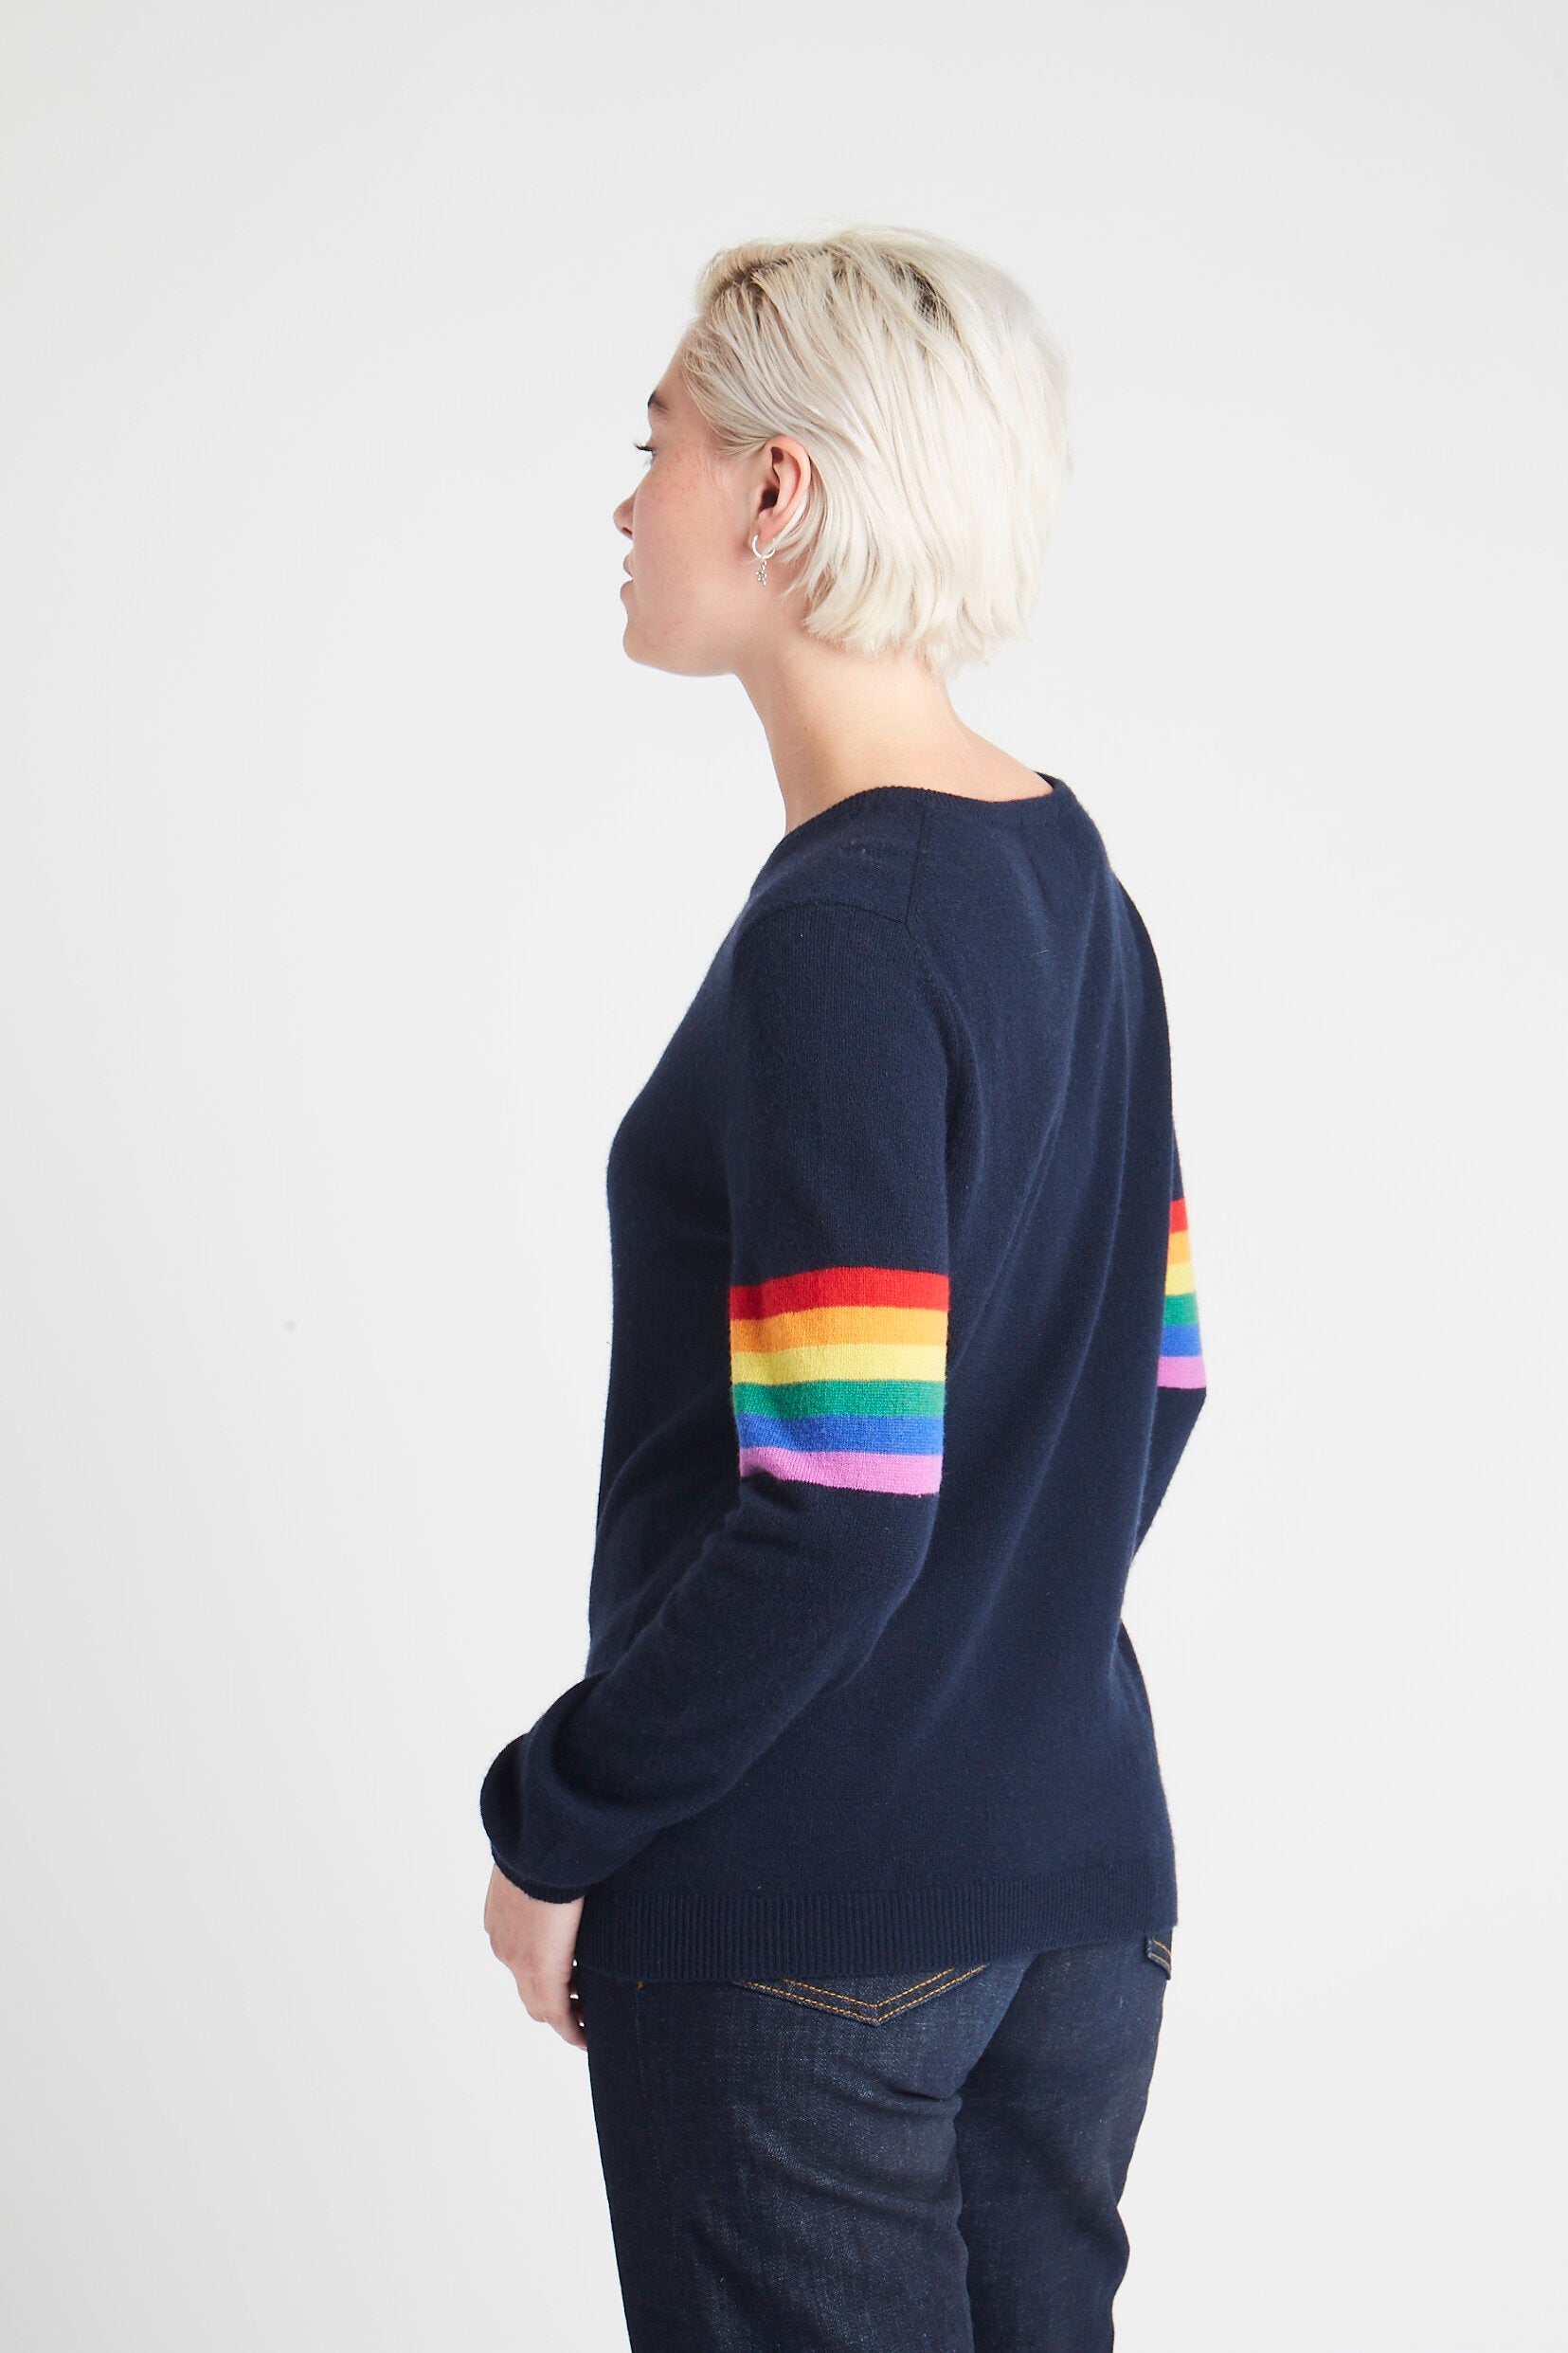 Blonde female model facing away from camera wearing Jumper1234 Rainbow Stripe Sleeve Cashmere Sleeve in Navy